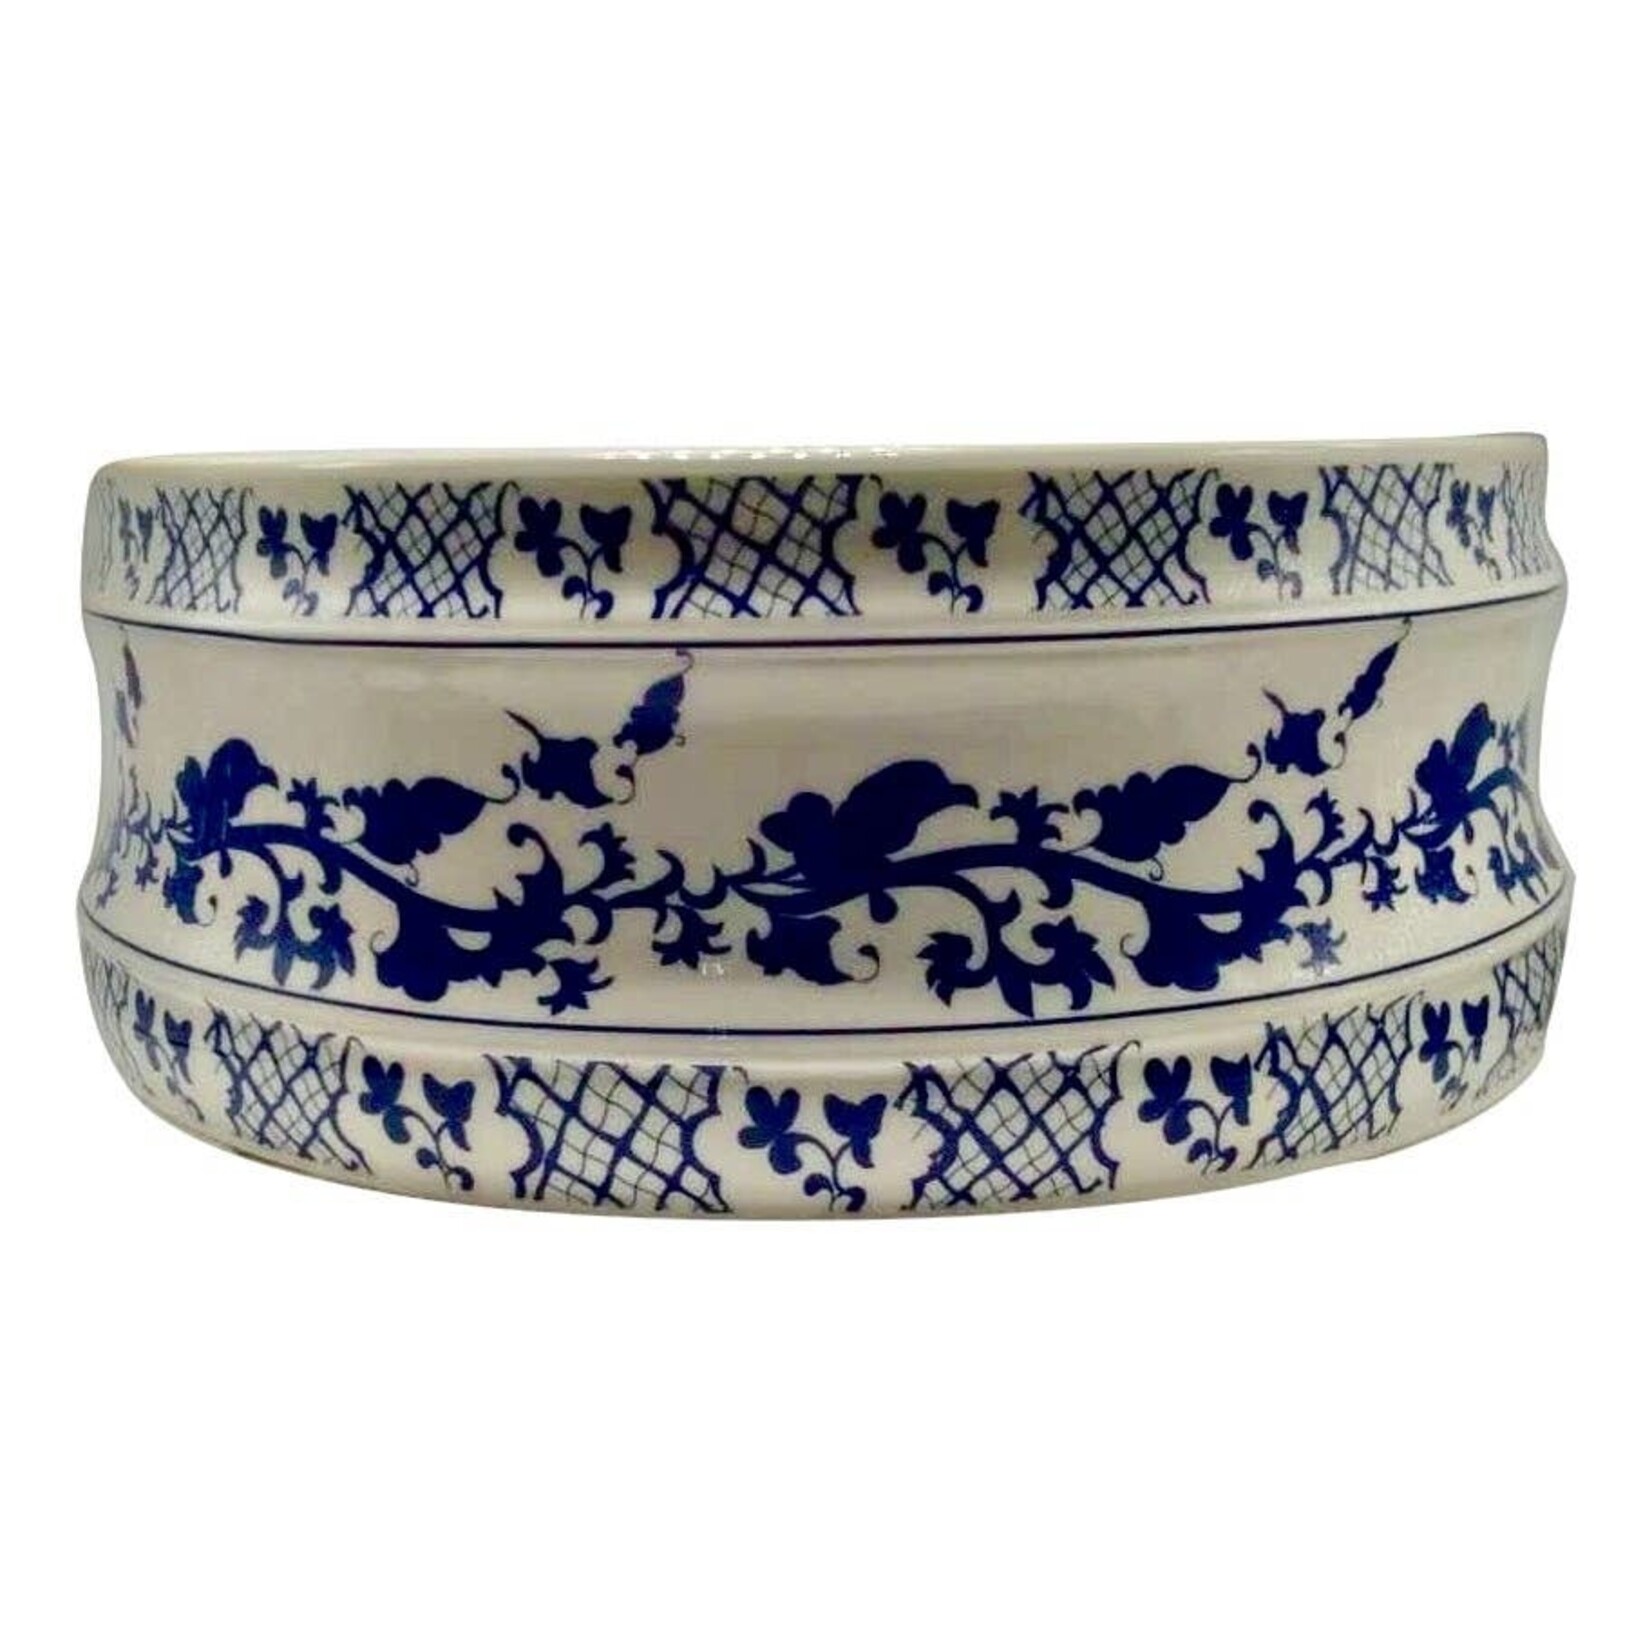 The Enchanted Home Porcelain Pagoda Chinoiserie Bowl